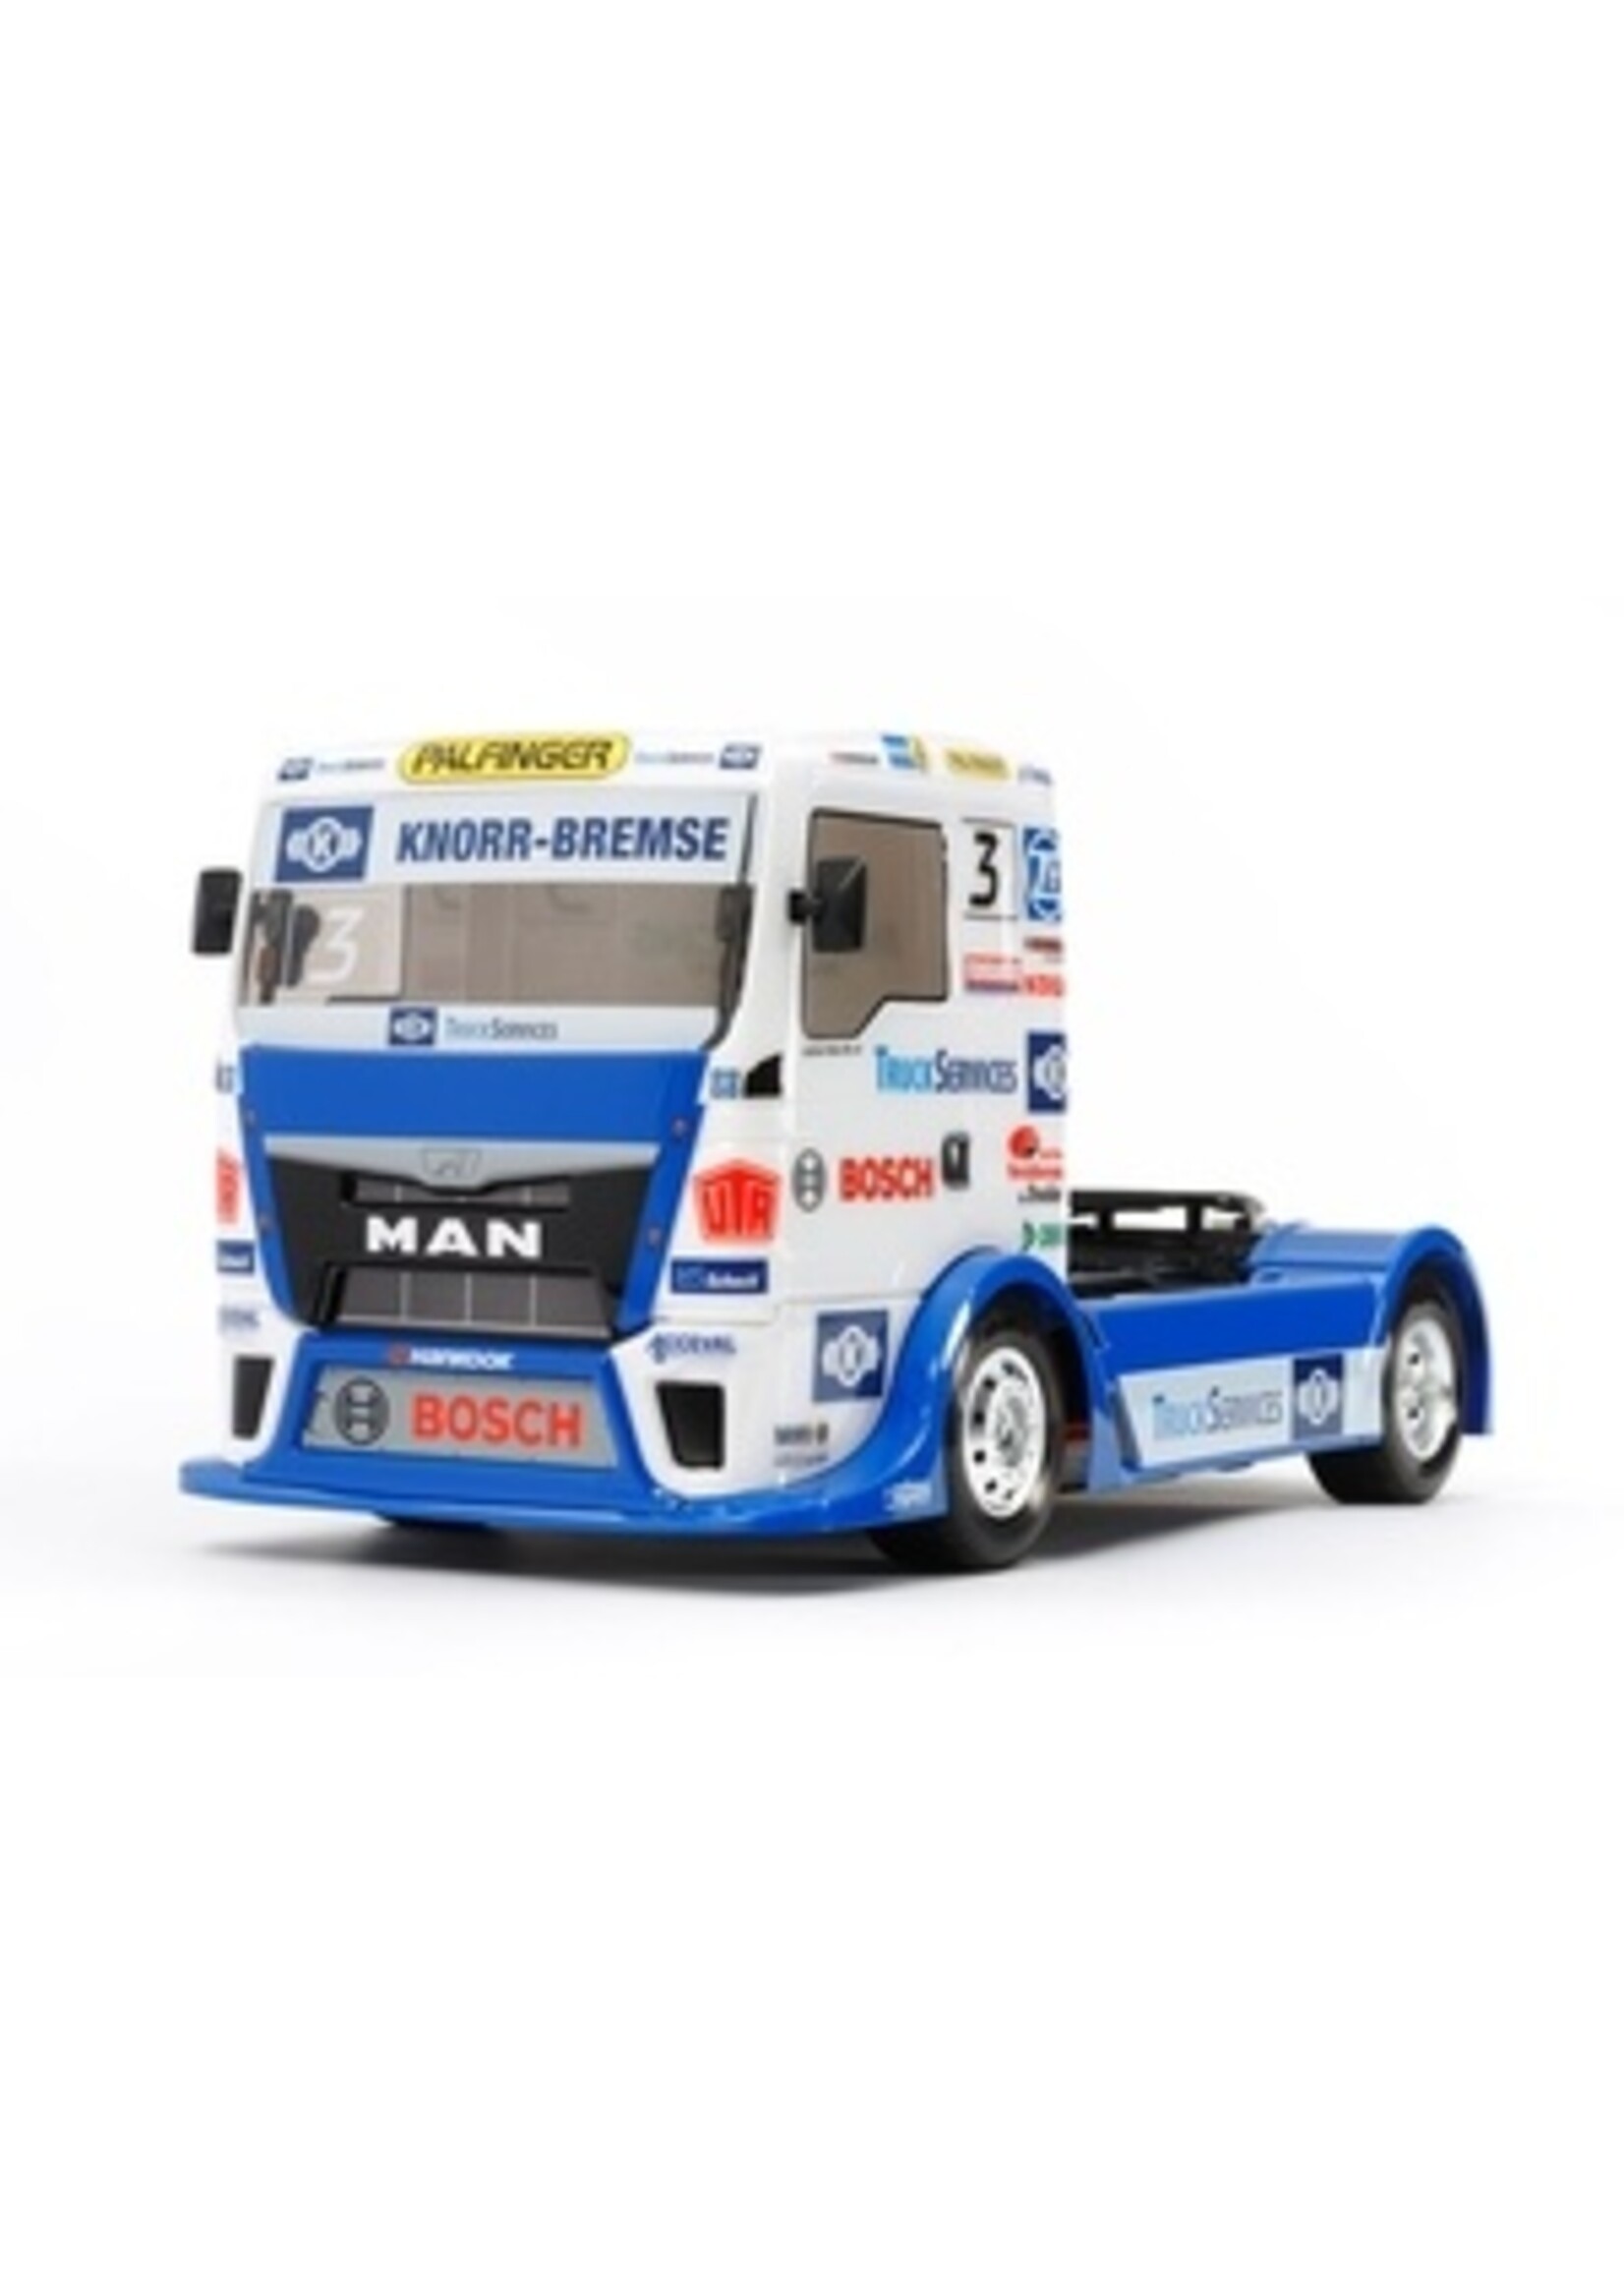 Tamiya TAM58632-A Tamiya 1/10 RC Team Hahn Racing MAN TGS On-Road Kit, with TT-01 Type E Chassis - Includes HobbyWing ESC